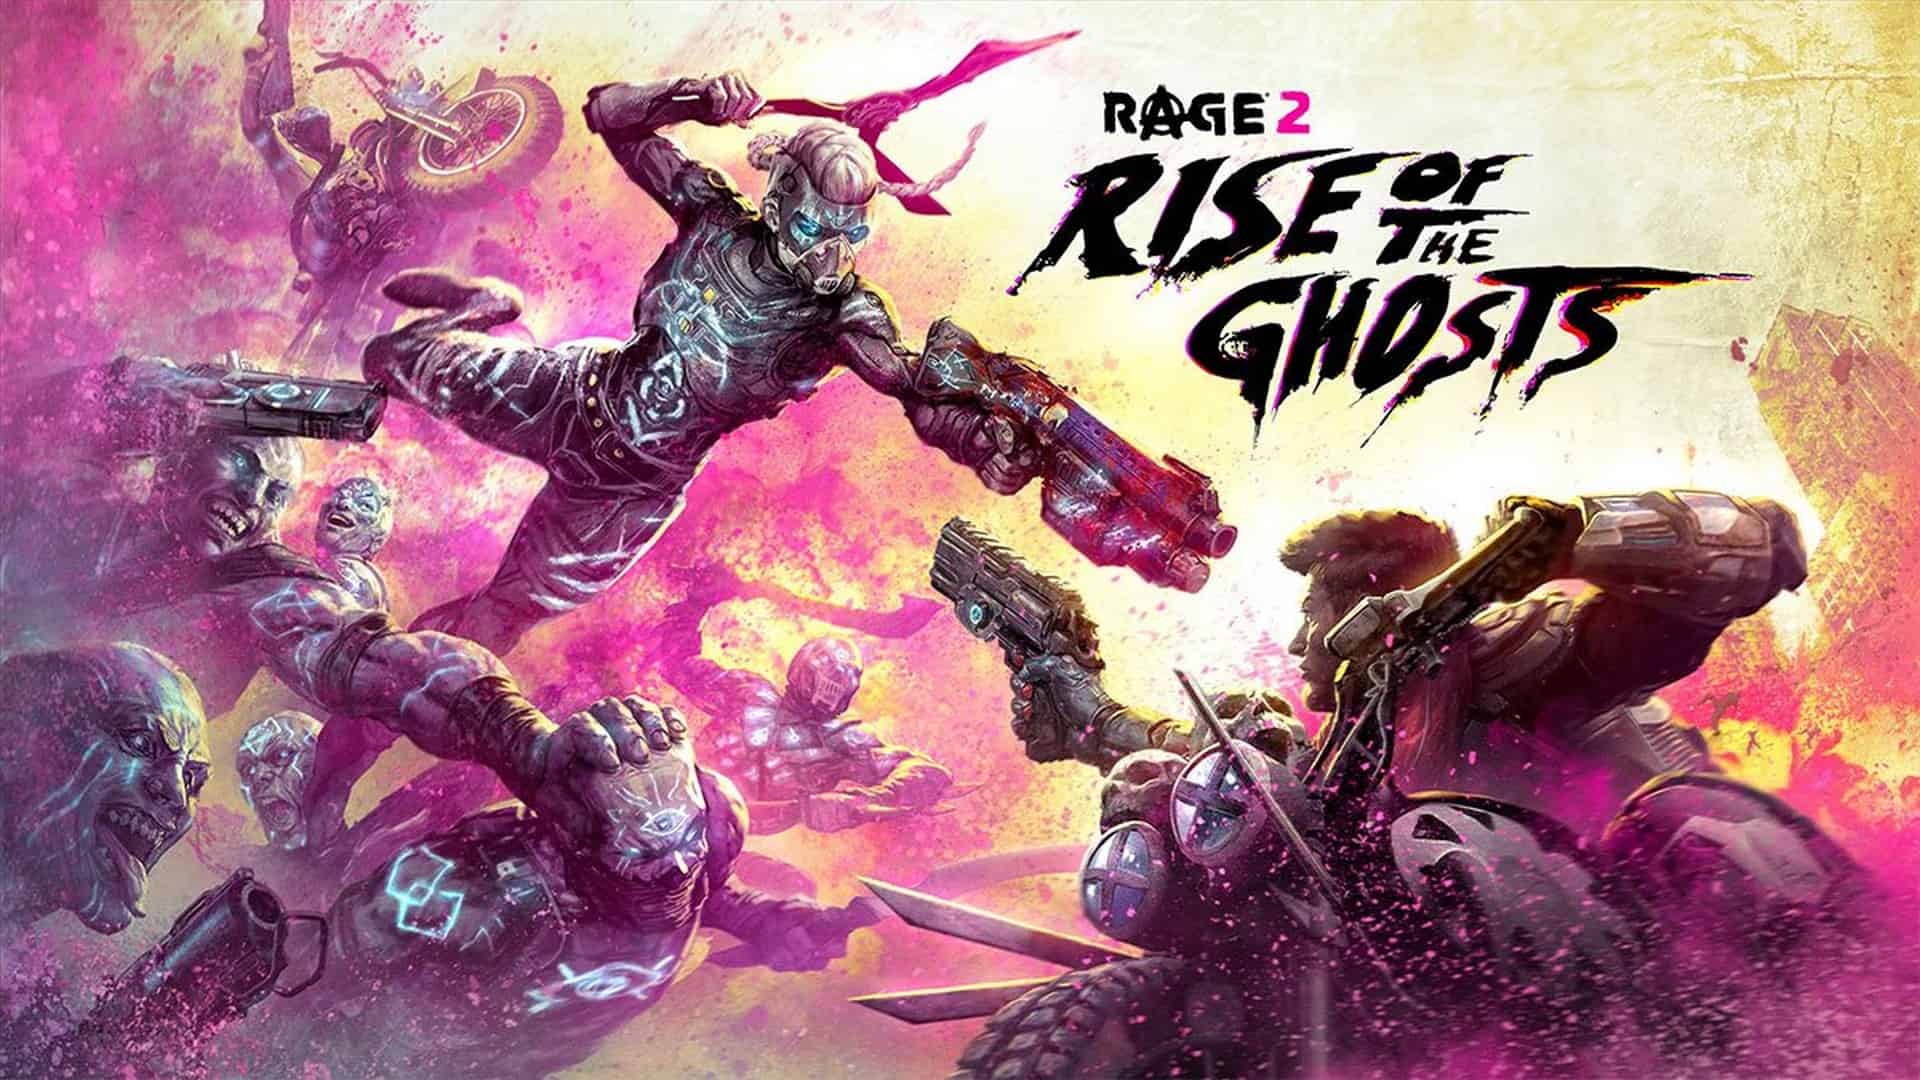 RAGE 2’s Rise of the Ghost Expansion Available Now